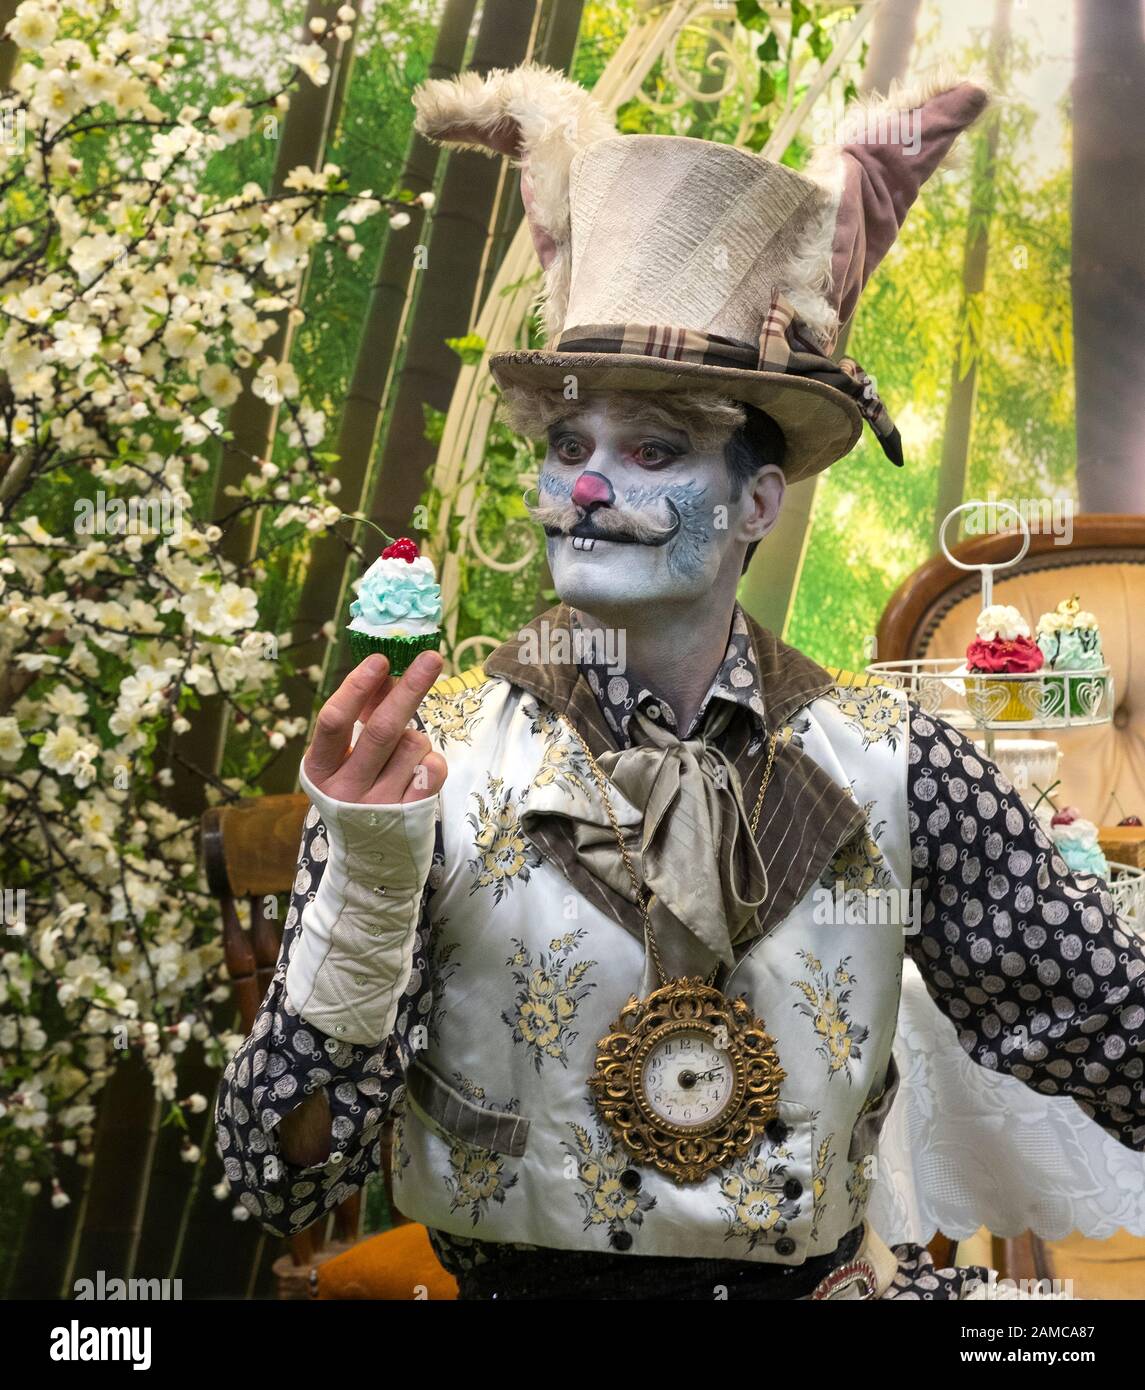 Alice In Wonderland Mad Hatter character posing for photographs Stock Photo